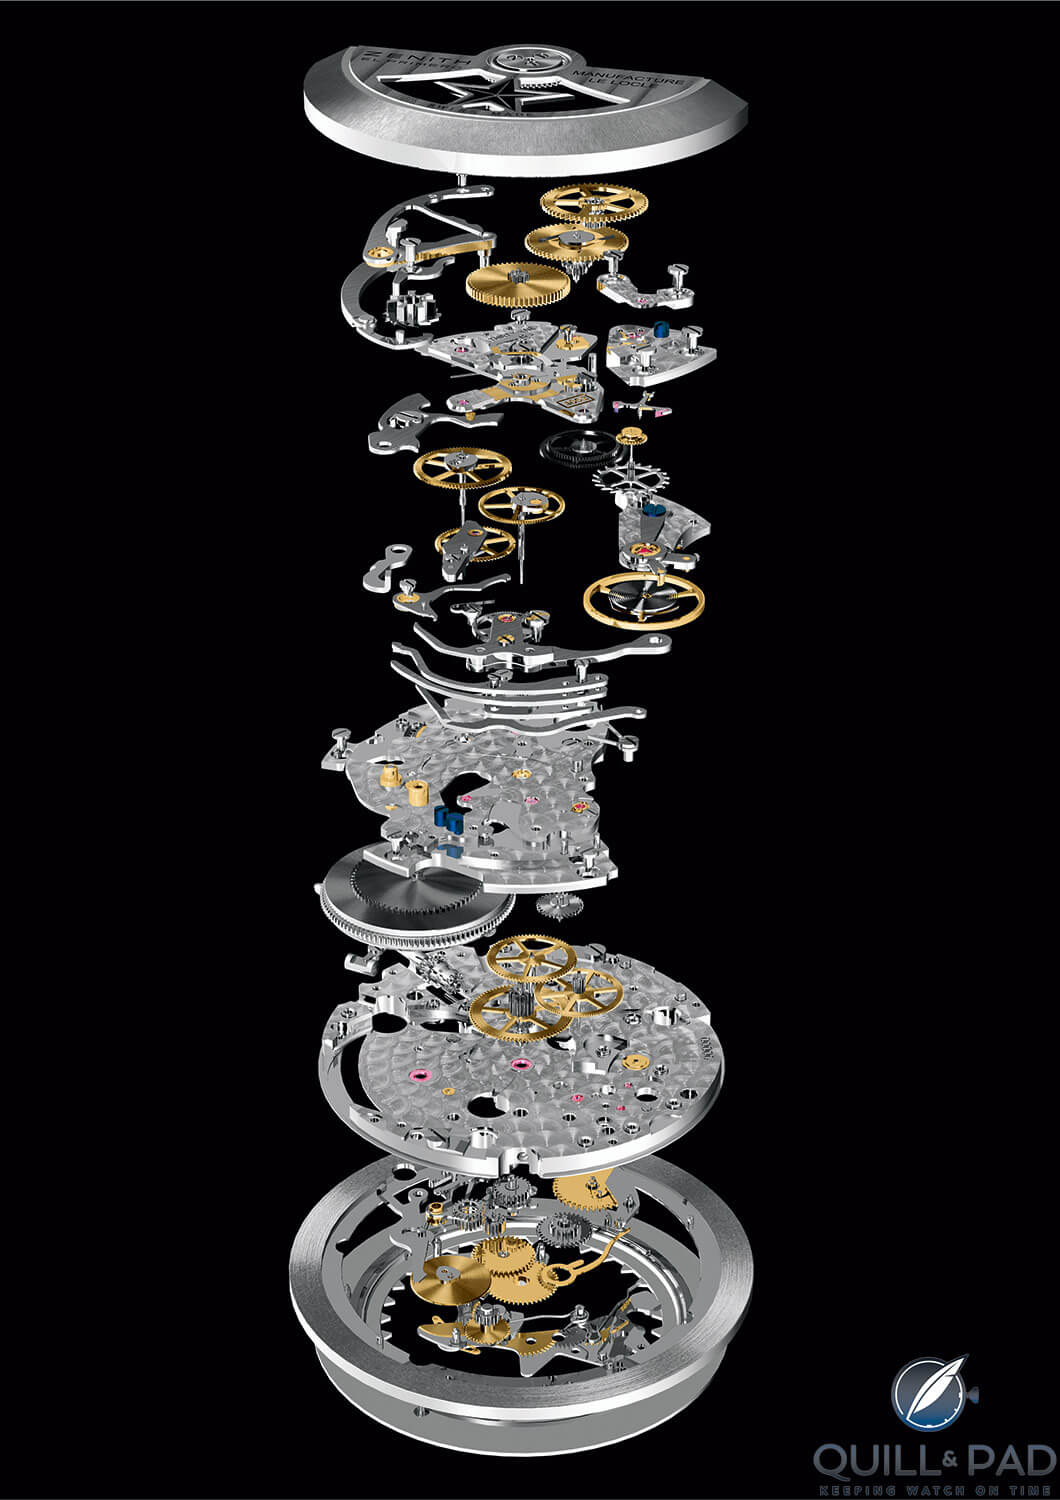 Exploded view of the Zenith El Primero automatic winding chronograph movement